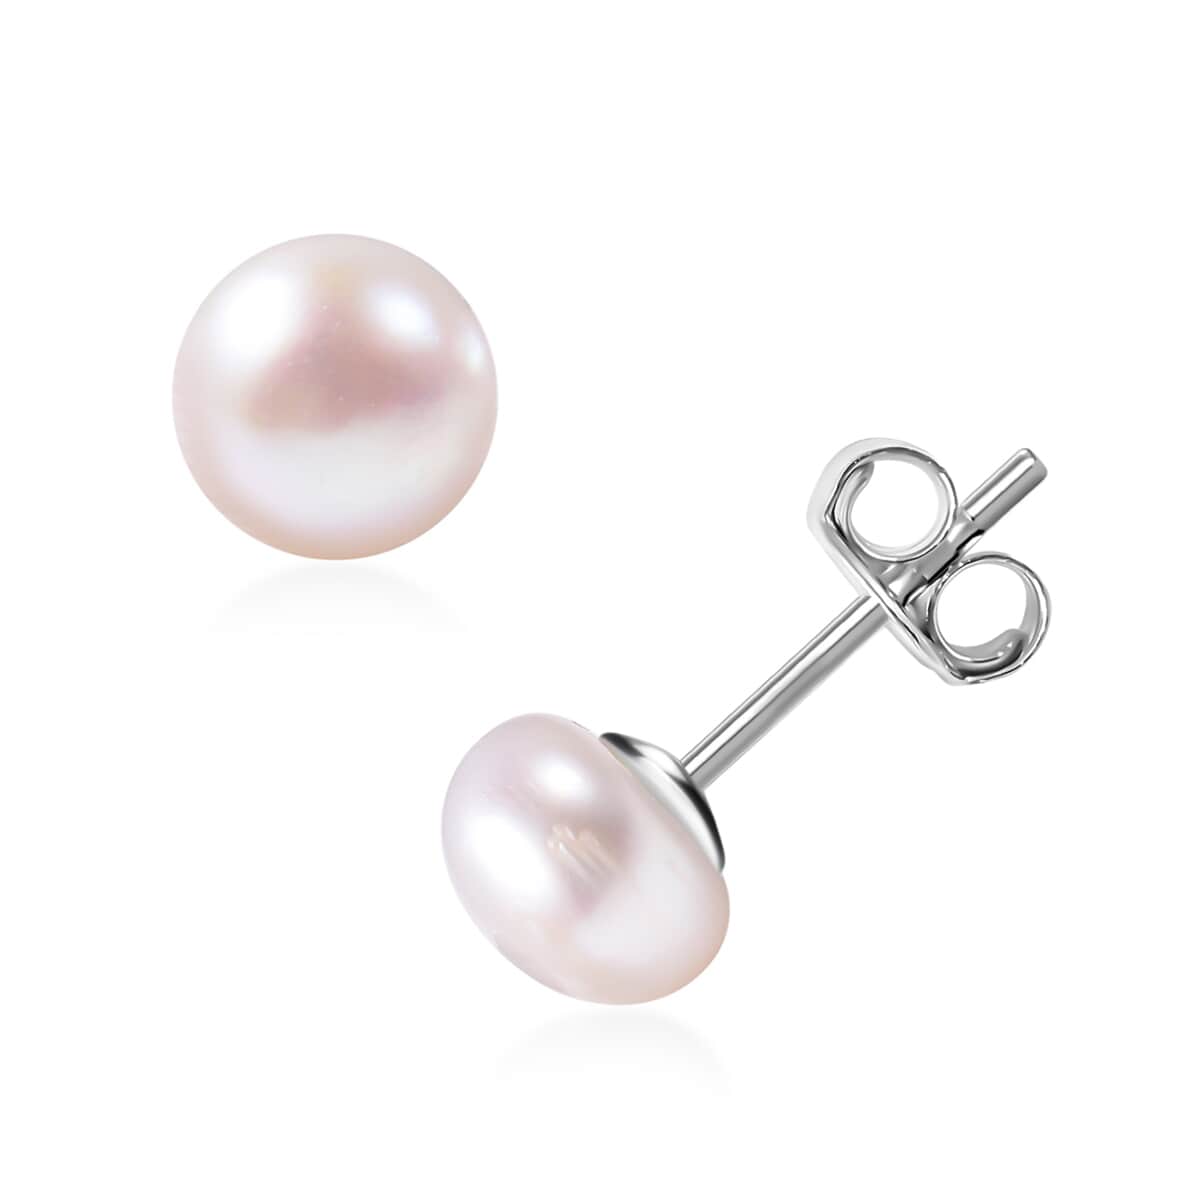 Set of 5 Freshwater Cultured White Pearl Stud Earrings in Stainless Steel, Solitaire Pearl Earrings, Pearl Jewelry For Women image number 3